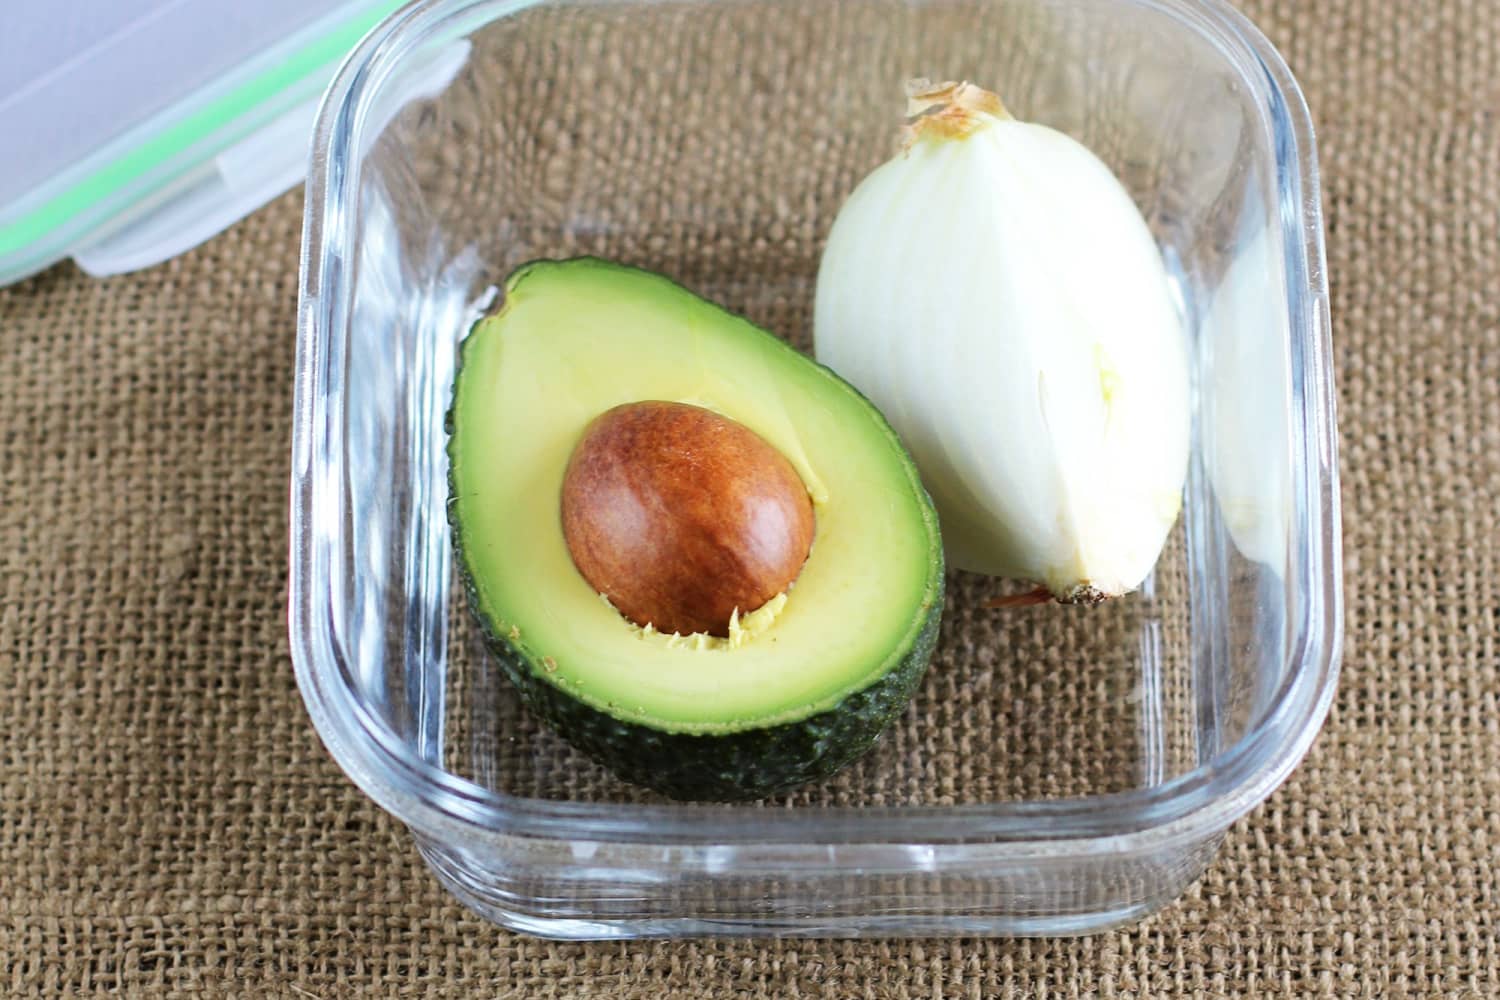 Kitchen Questions: How to Keep a Cut Avocado Fresh?